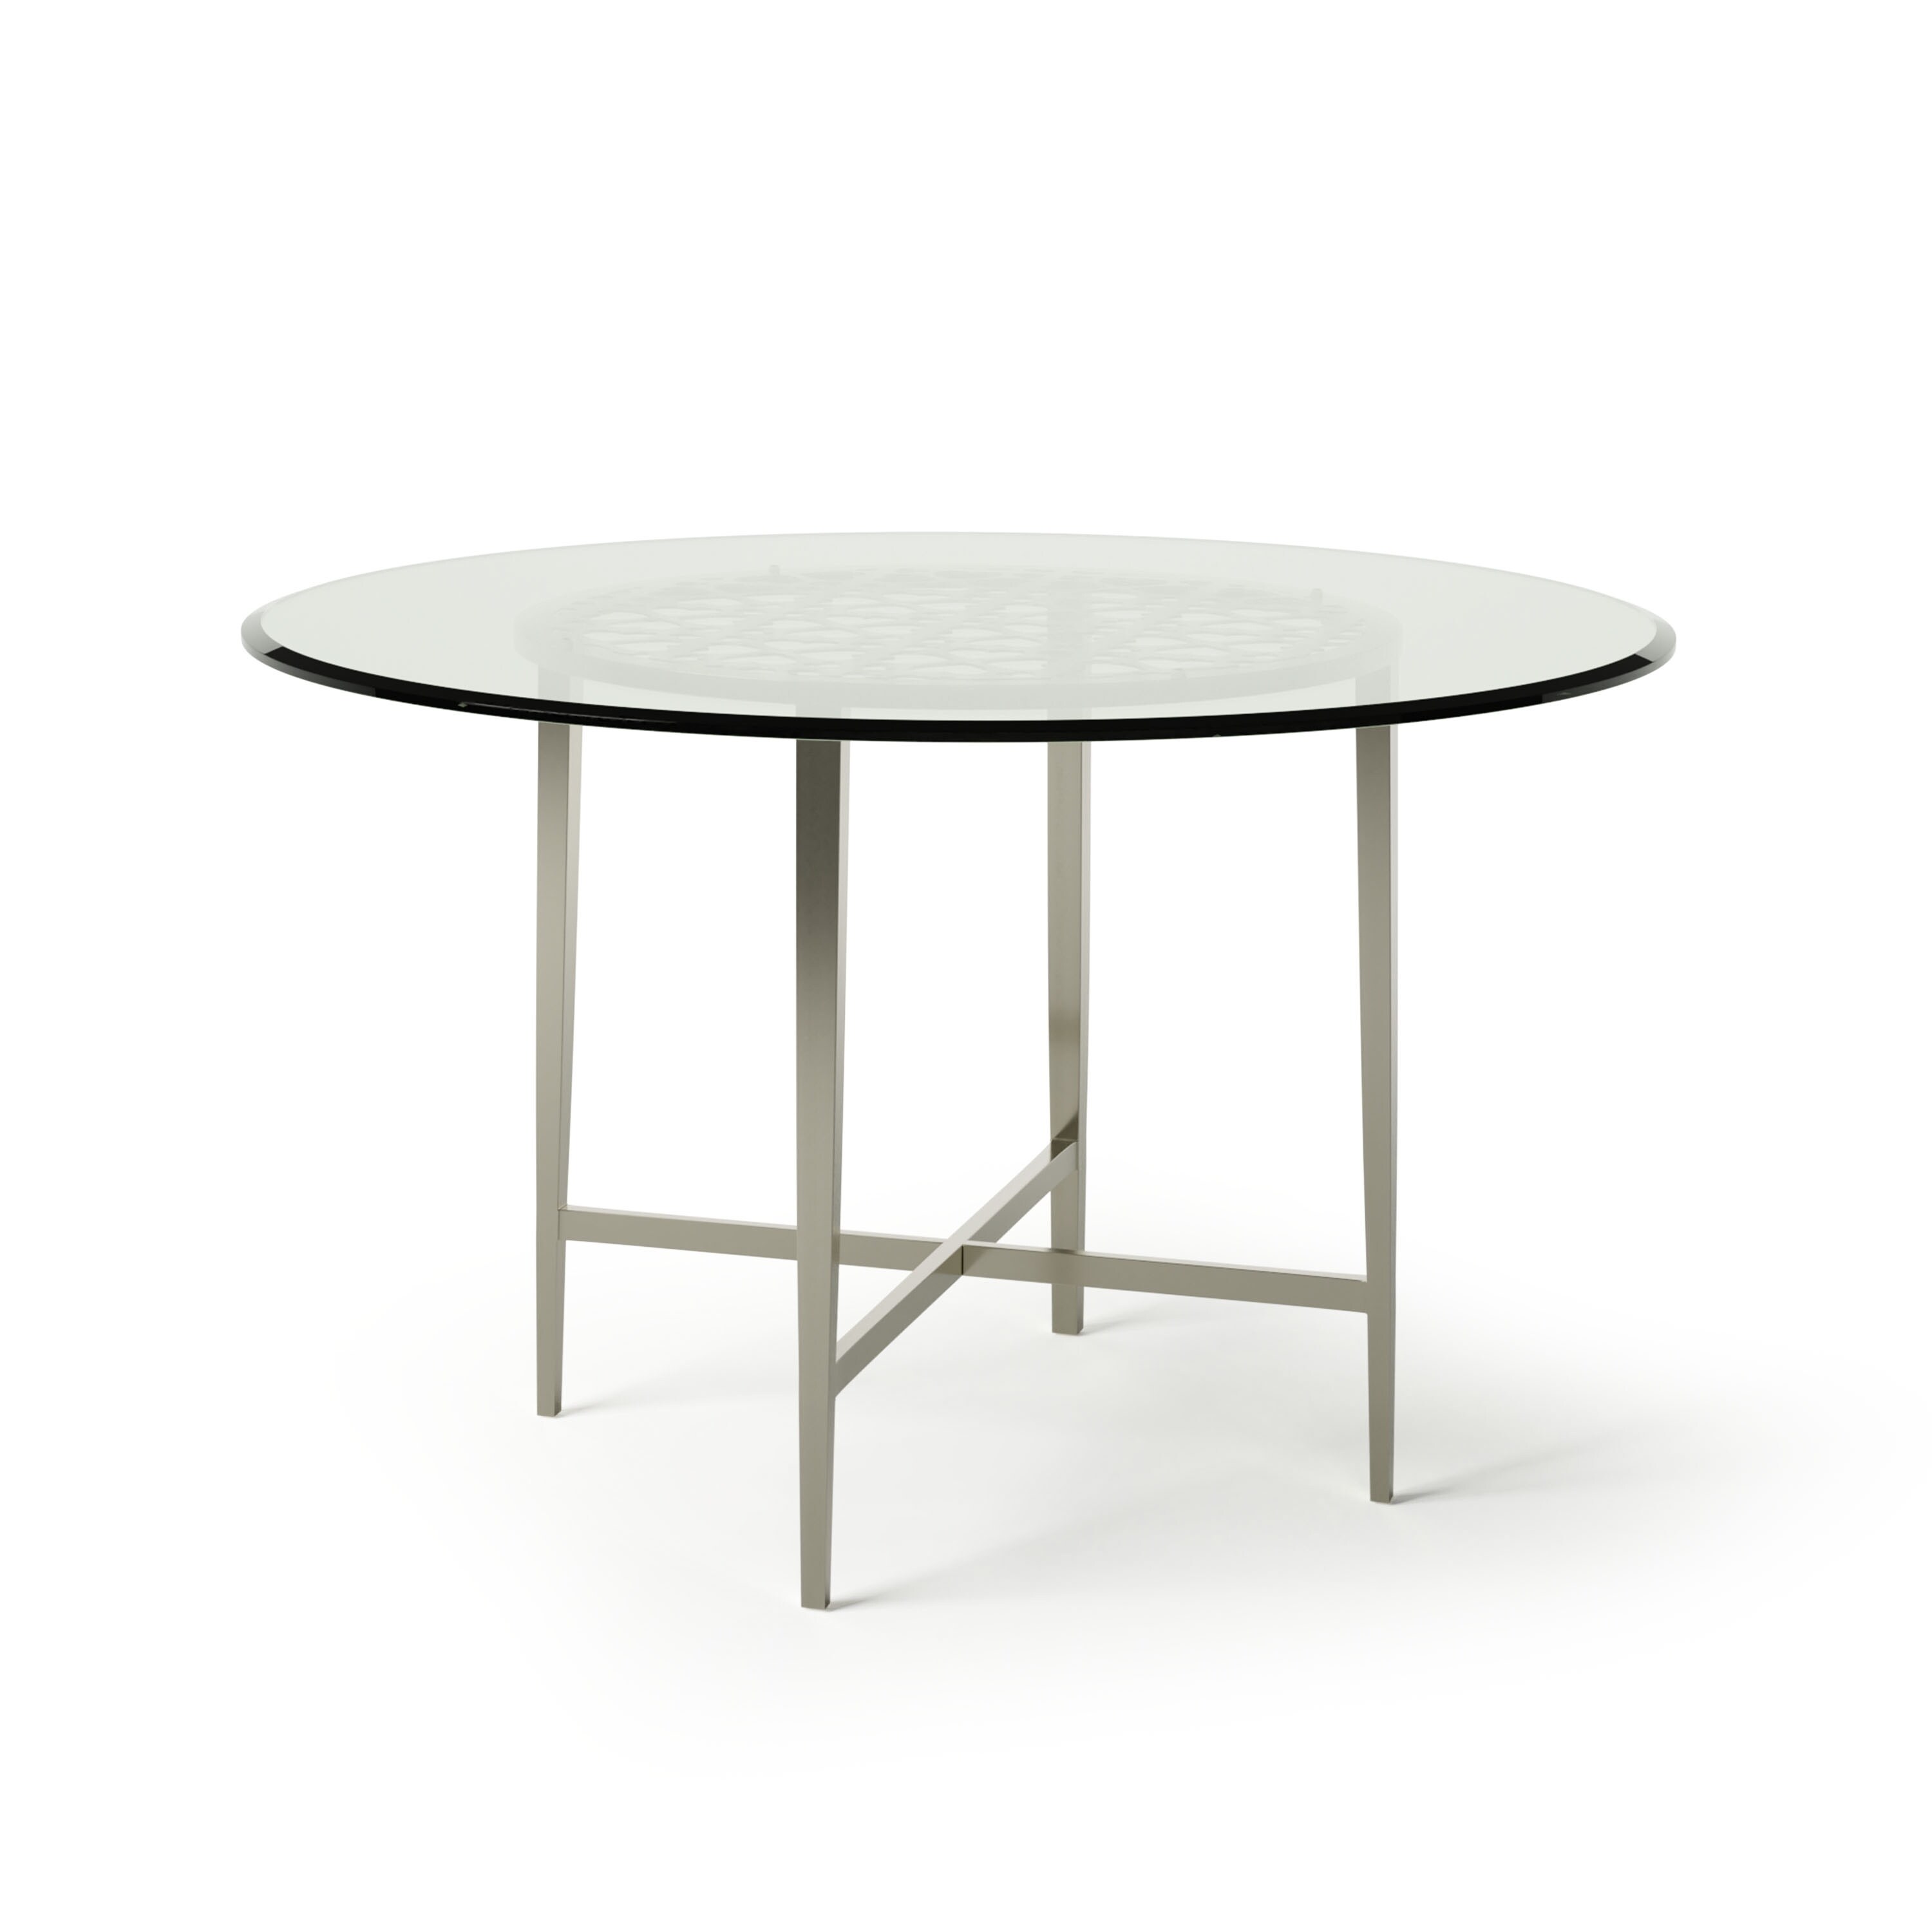 Furniture Of America Shelley Contemporary 48 Inch Round Silver Glass Top Dining Table Overstock 29126434